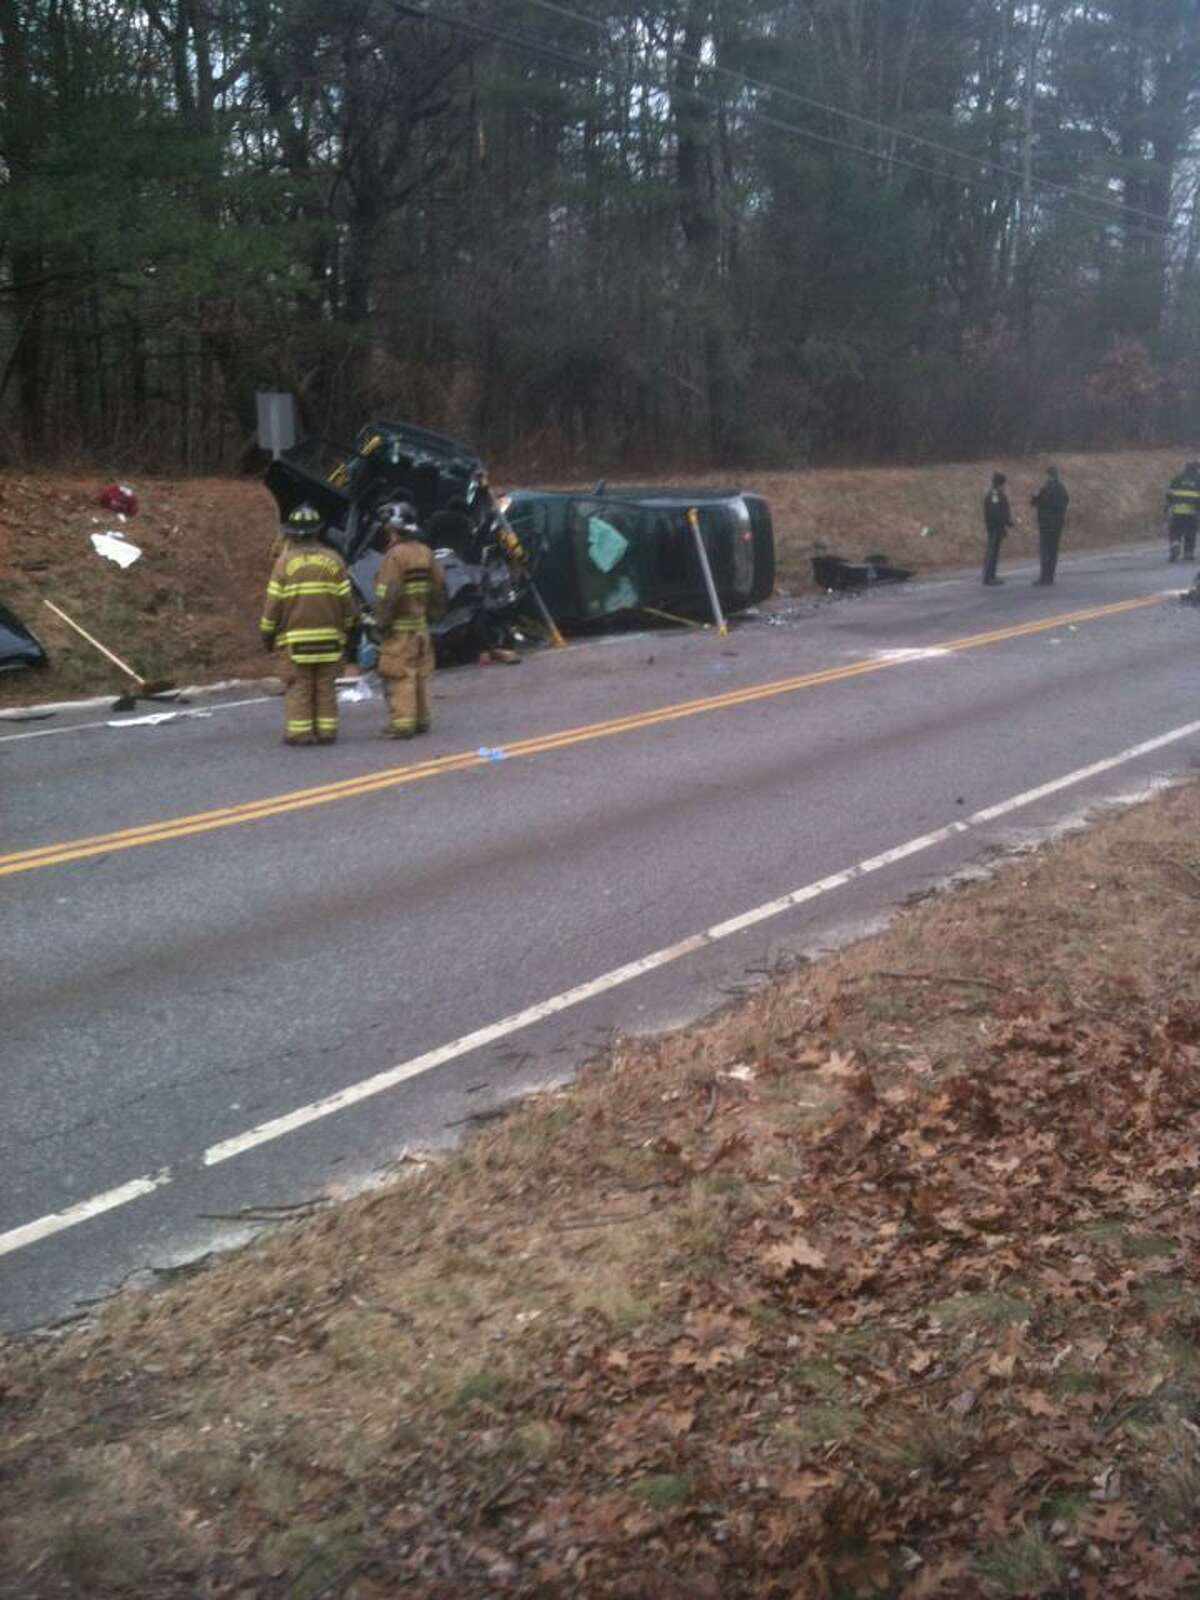 Photo courtesy of WFSB's Facebook page. Accident on Route 4 near Lewis Mills High School.